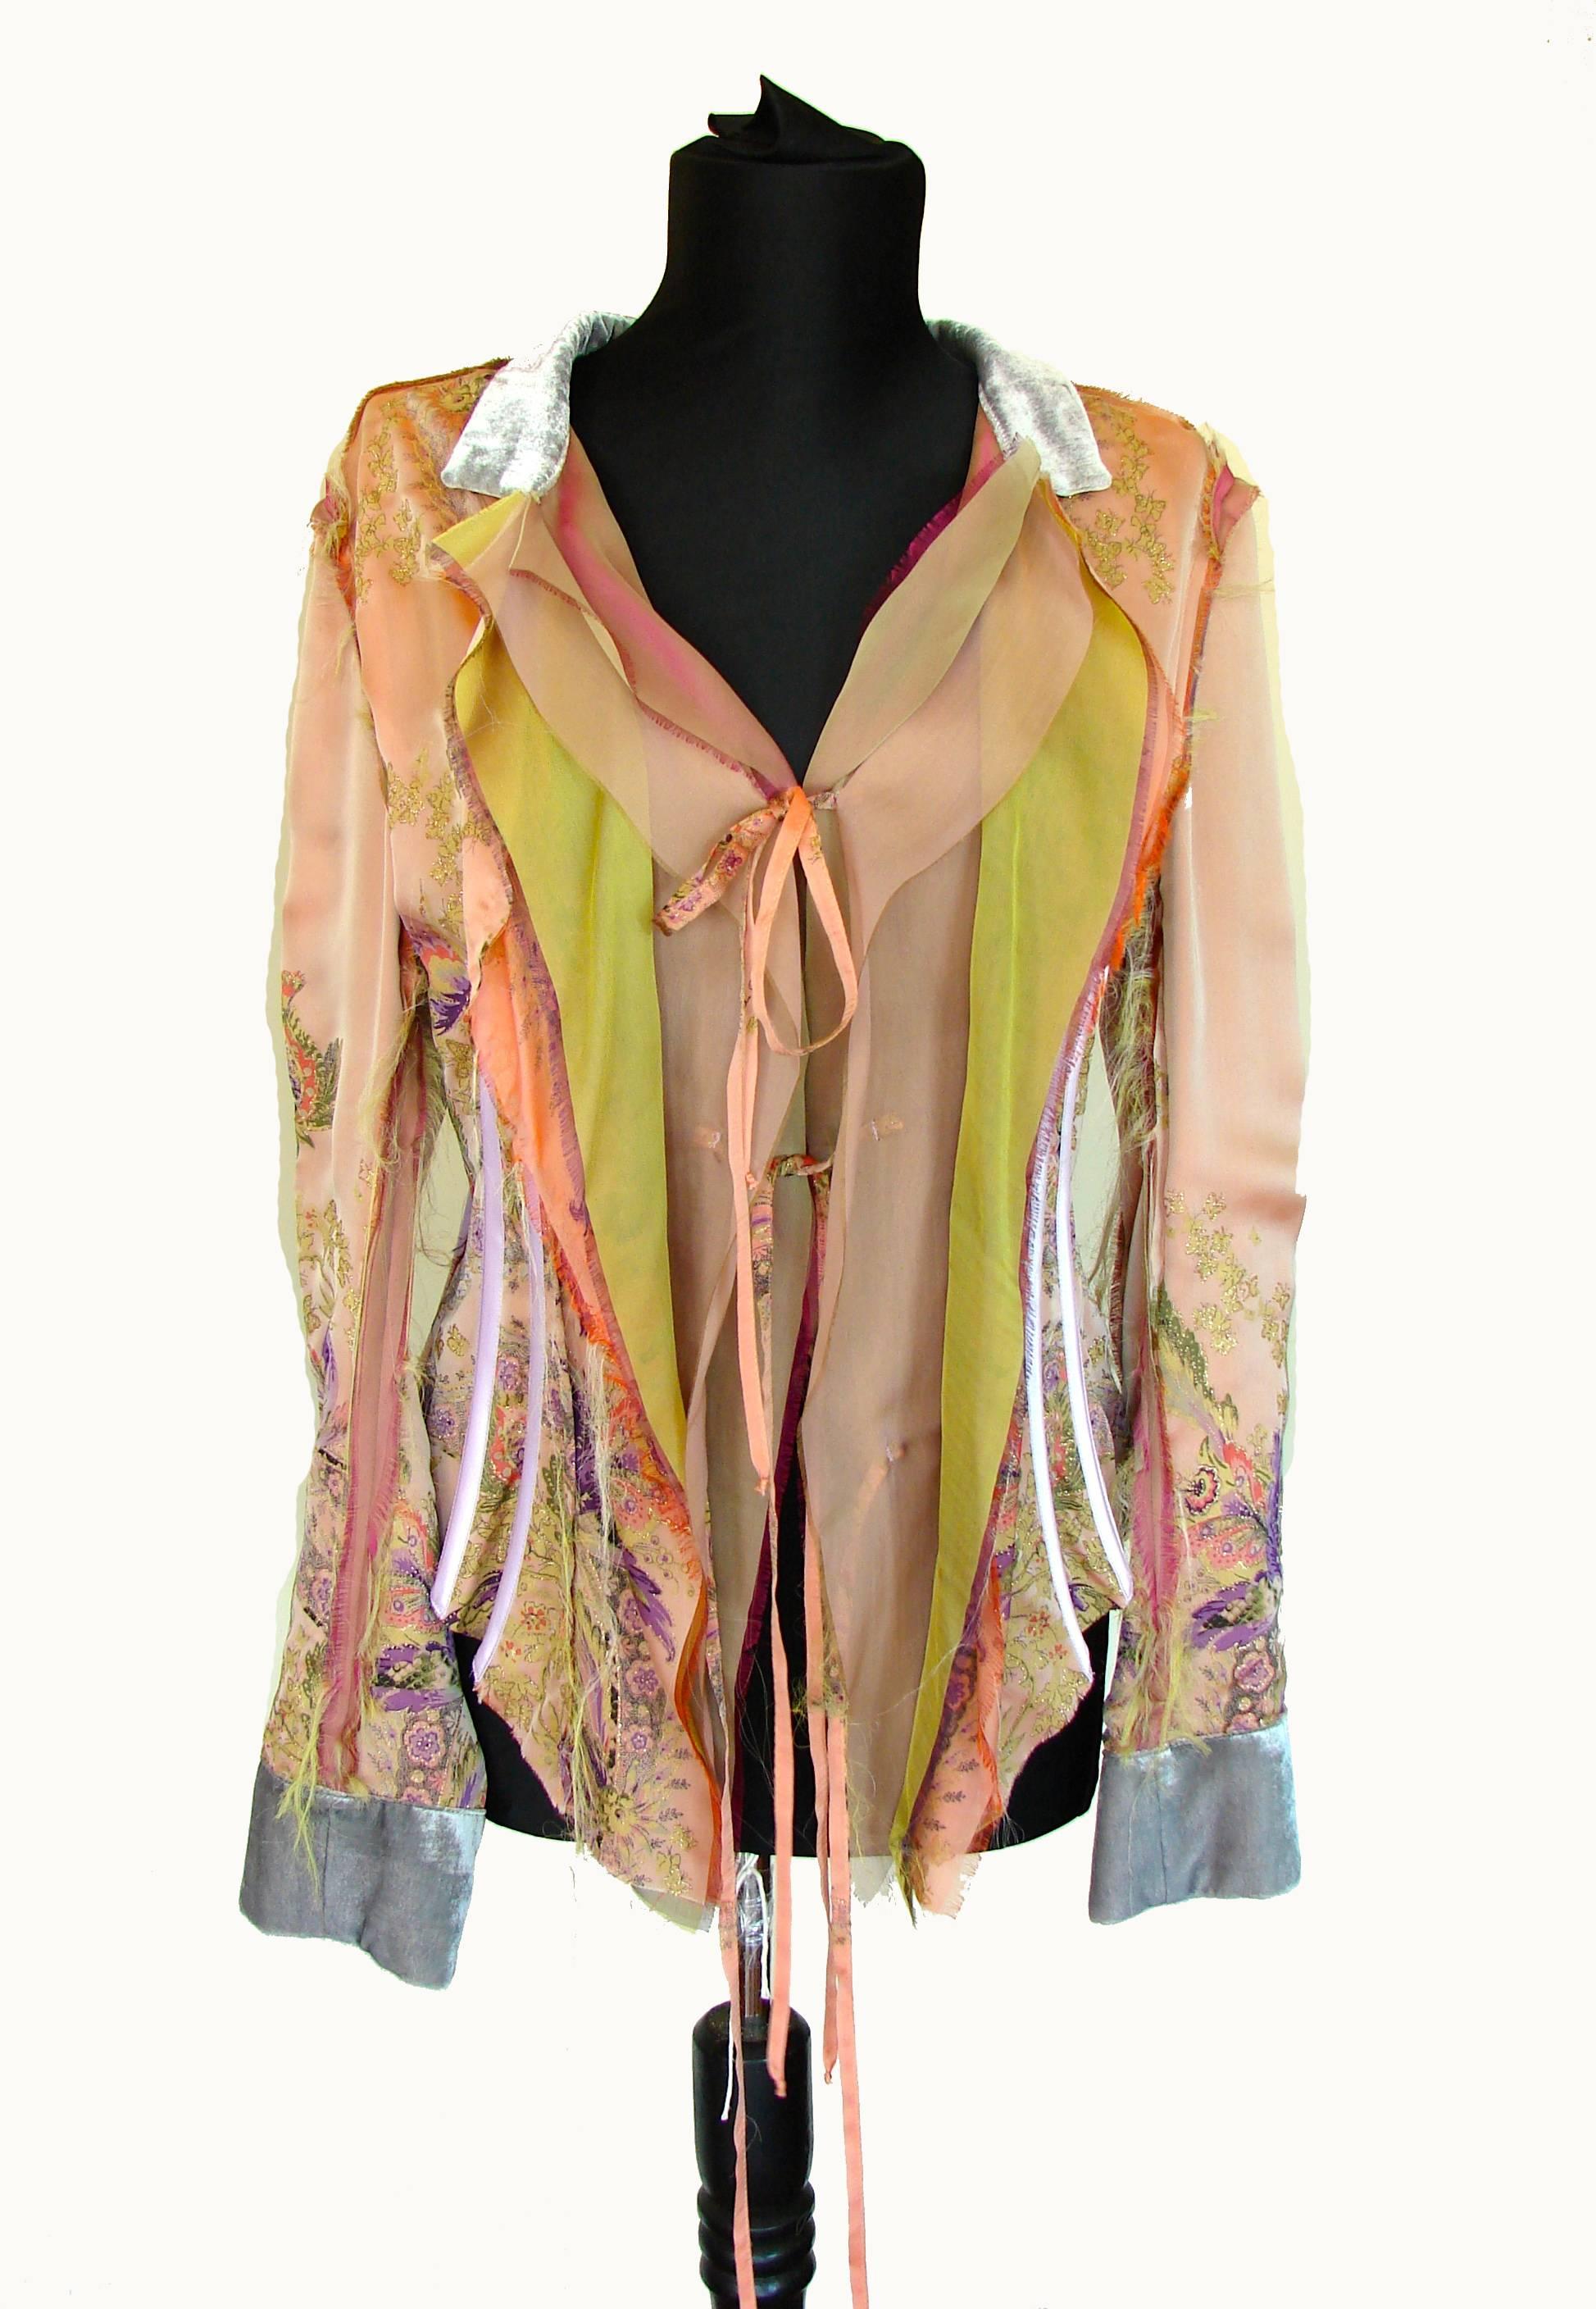 Here's a cool jacket from Roberto Cavalli made from unfinished layers of silk in shades of peach, lime & lilac, and gray shimmering velvet trim at the cuffs and collar.  This piece also features boning at the sides and back - all covered in lavender